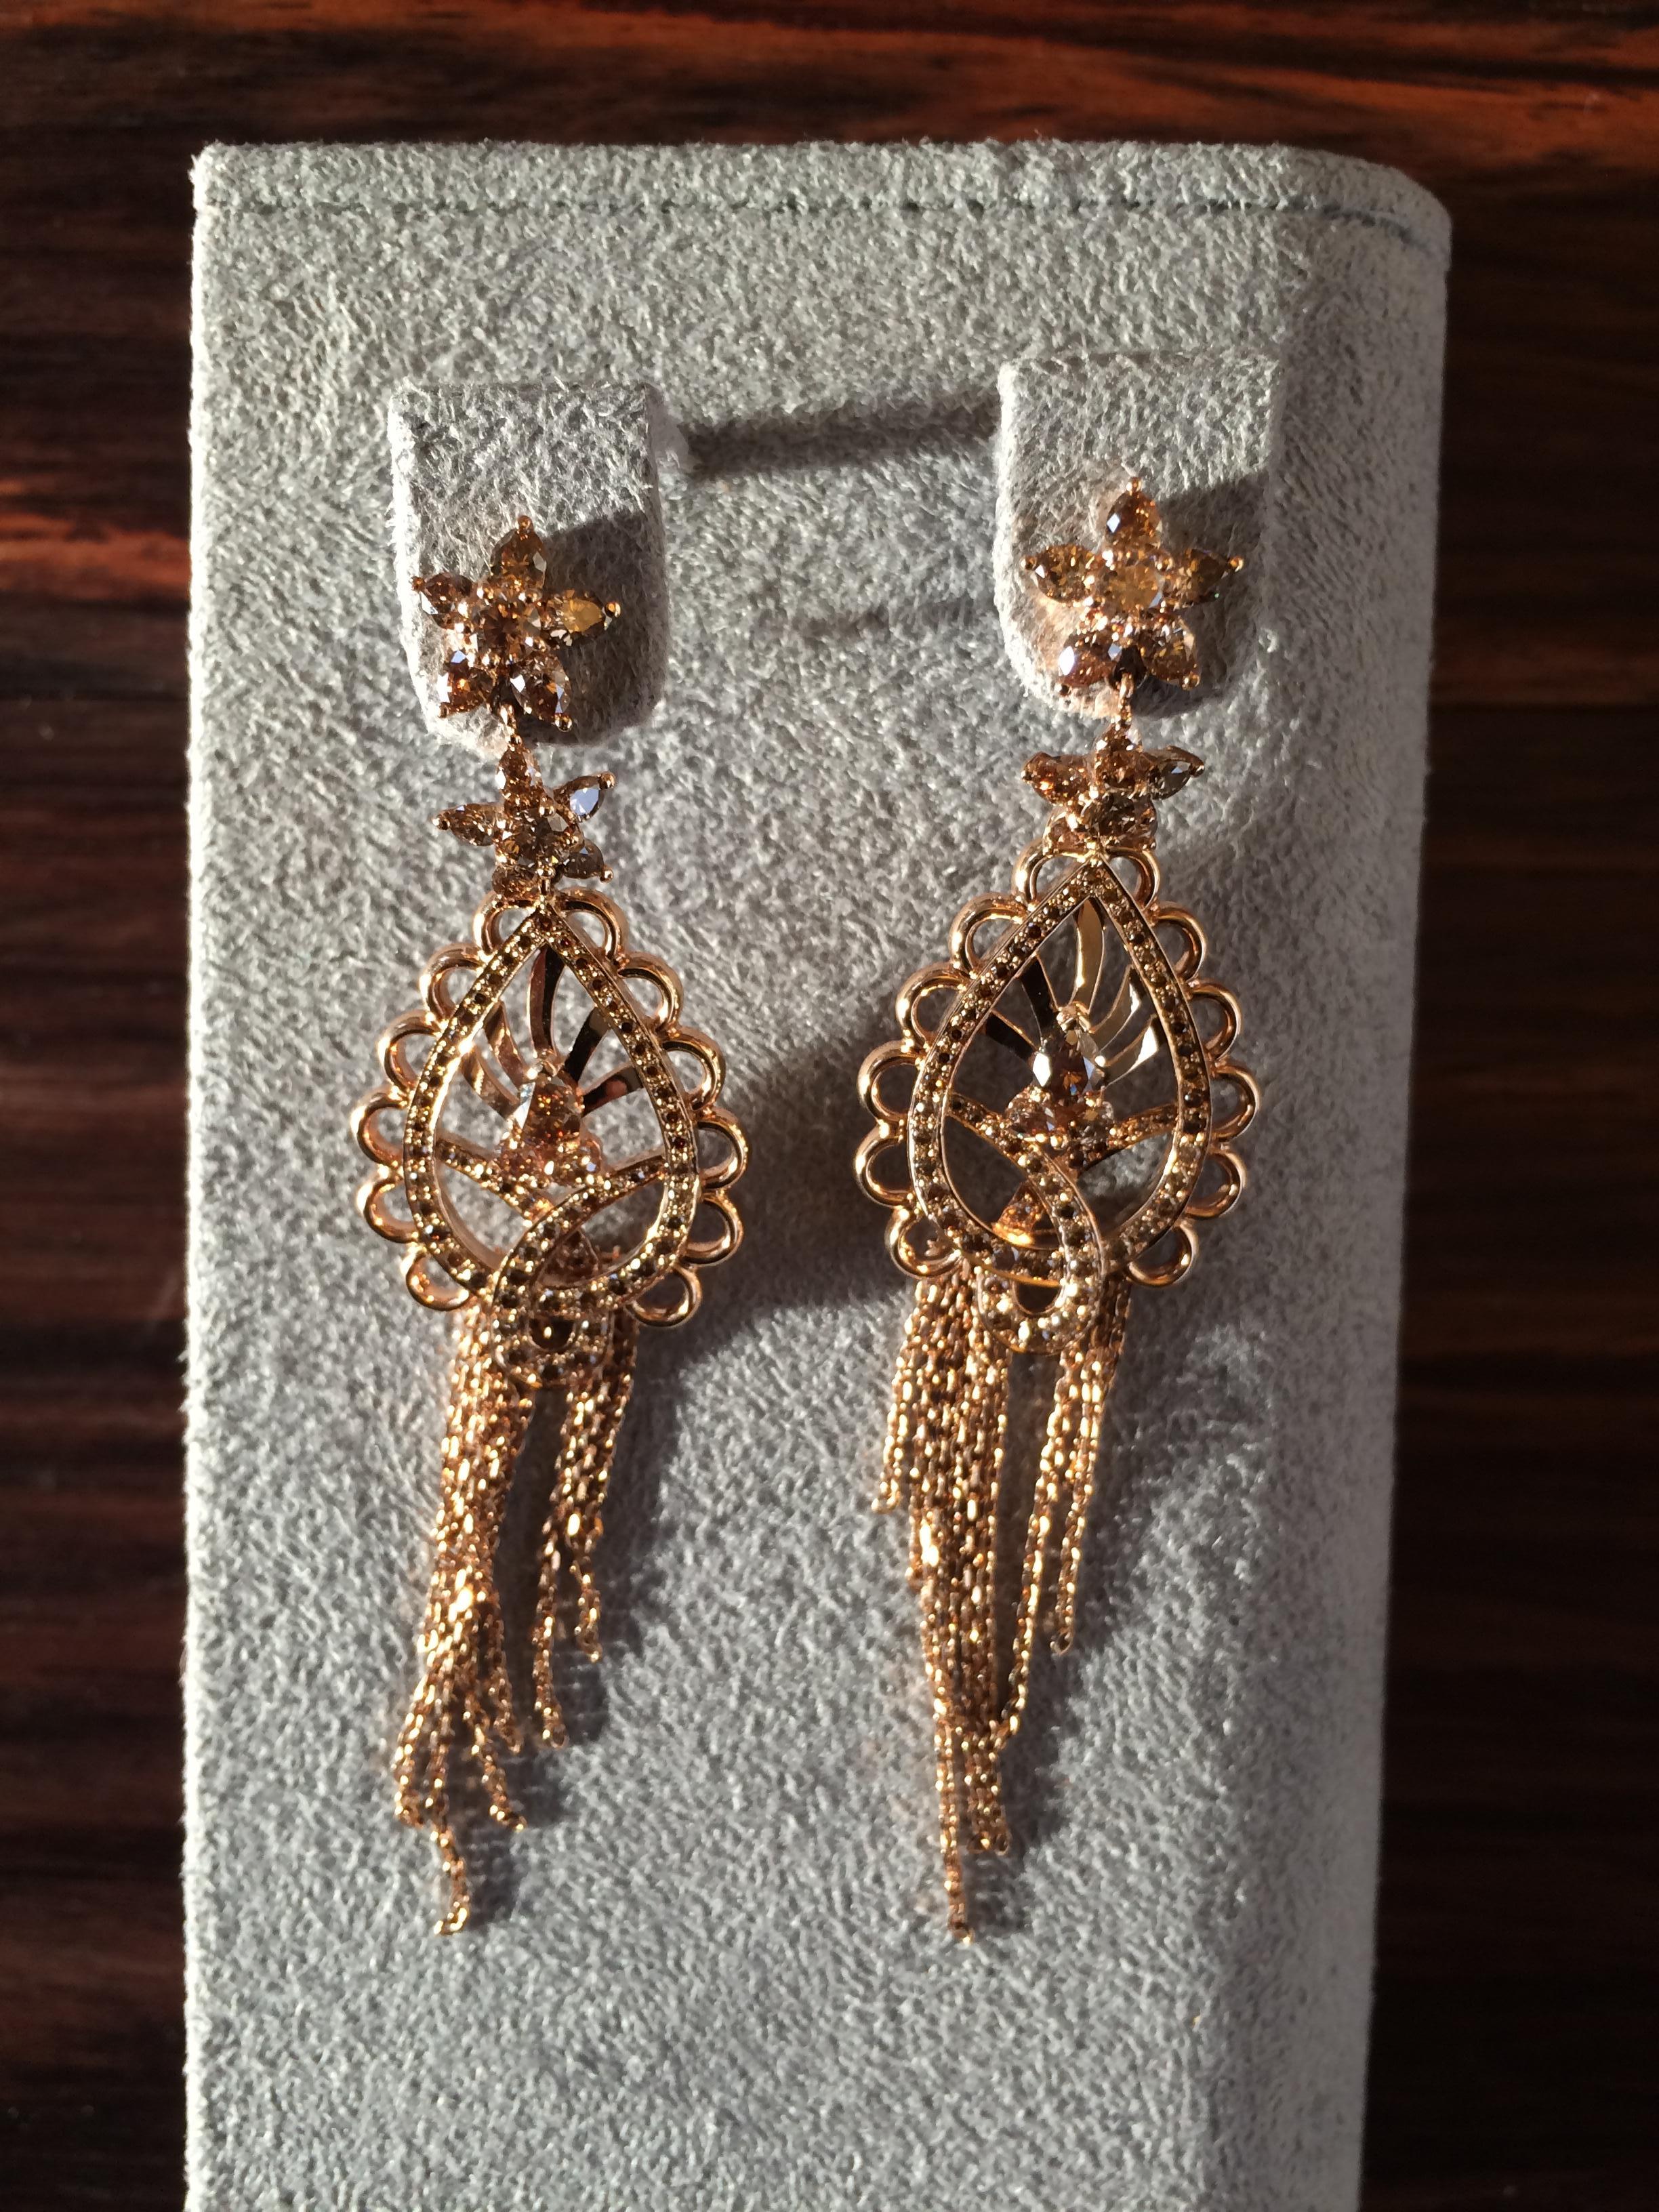 Ana de Costa Rose Gold Cognac Diamond Paisley Drop Chain Earrings Pendant Set In New Condition For Sale In London, Kent